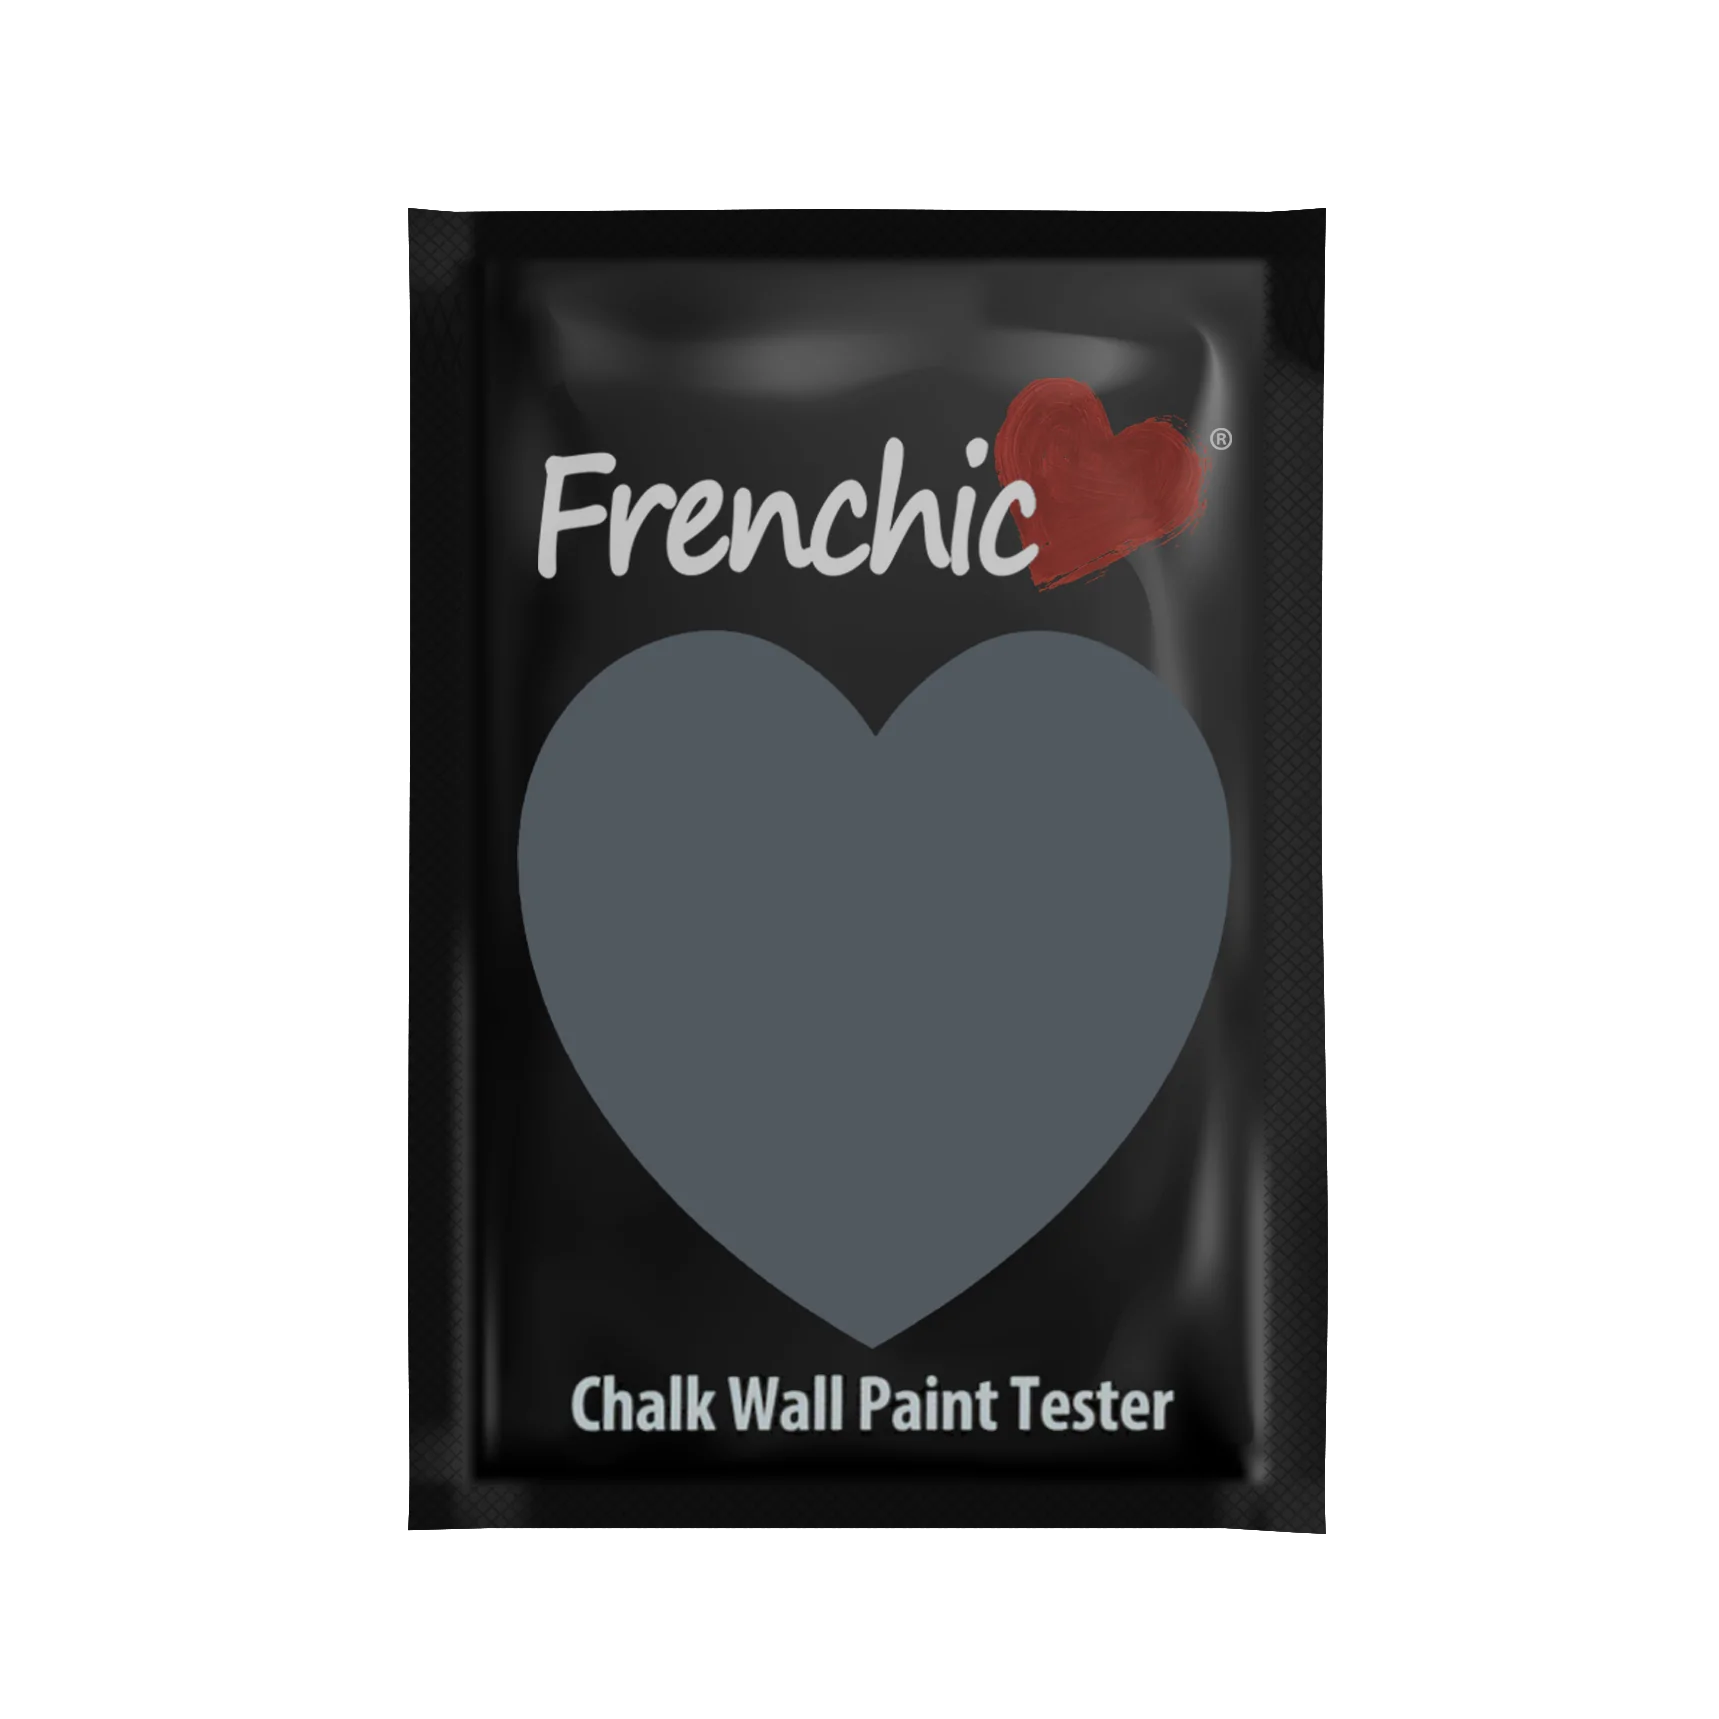 Frenchic Paint | Bandido Wall Paint Sample by Weirs of Baggot Street